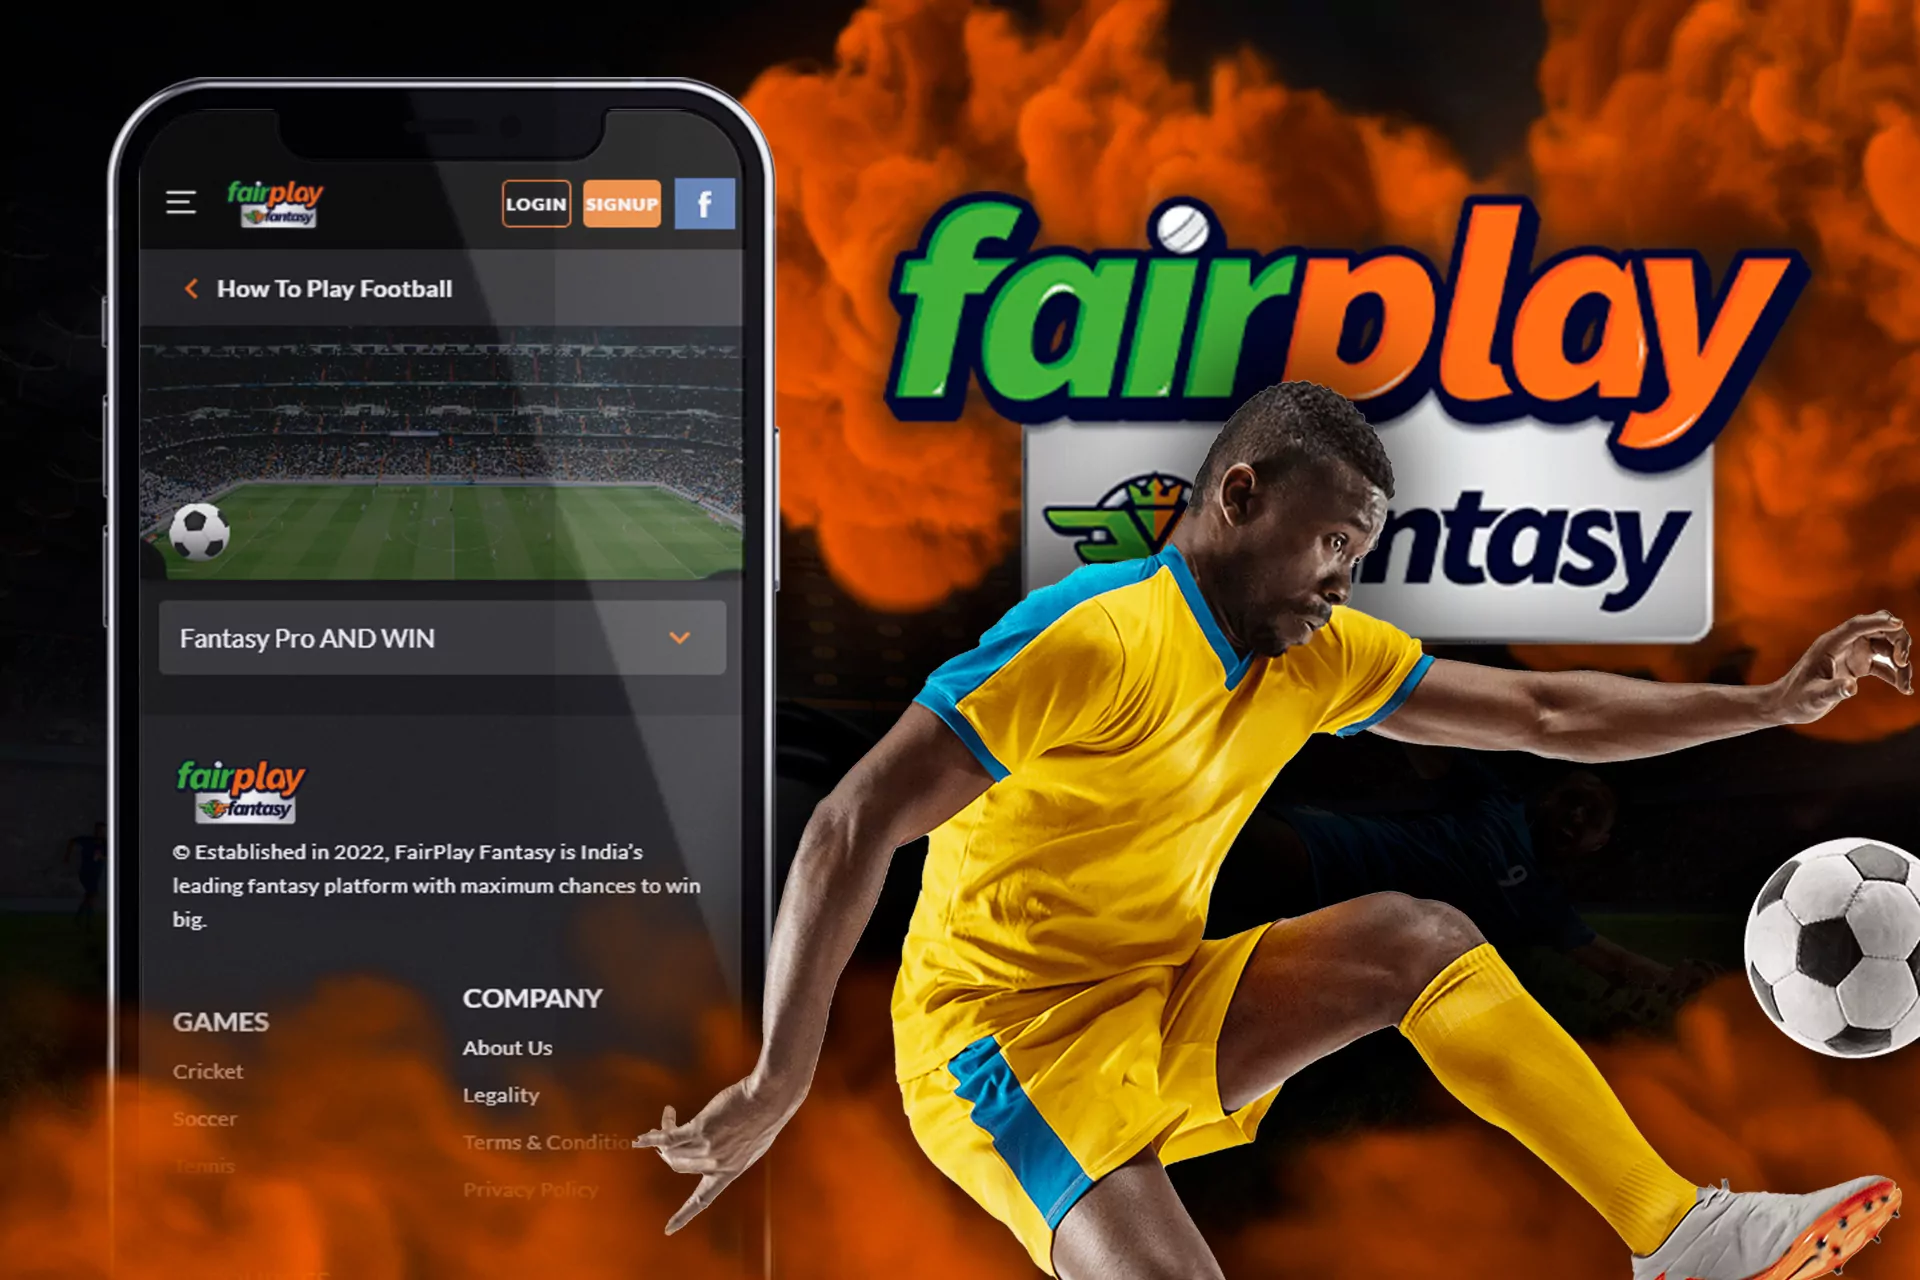 On Fairplay, you can place bets on fantasy football matches.